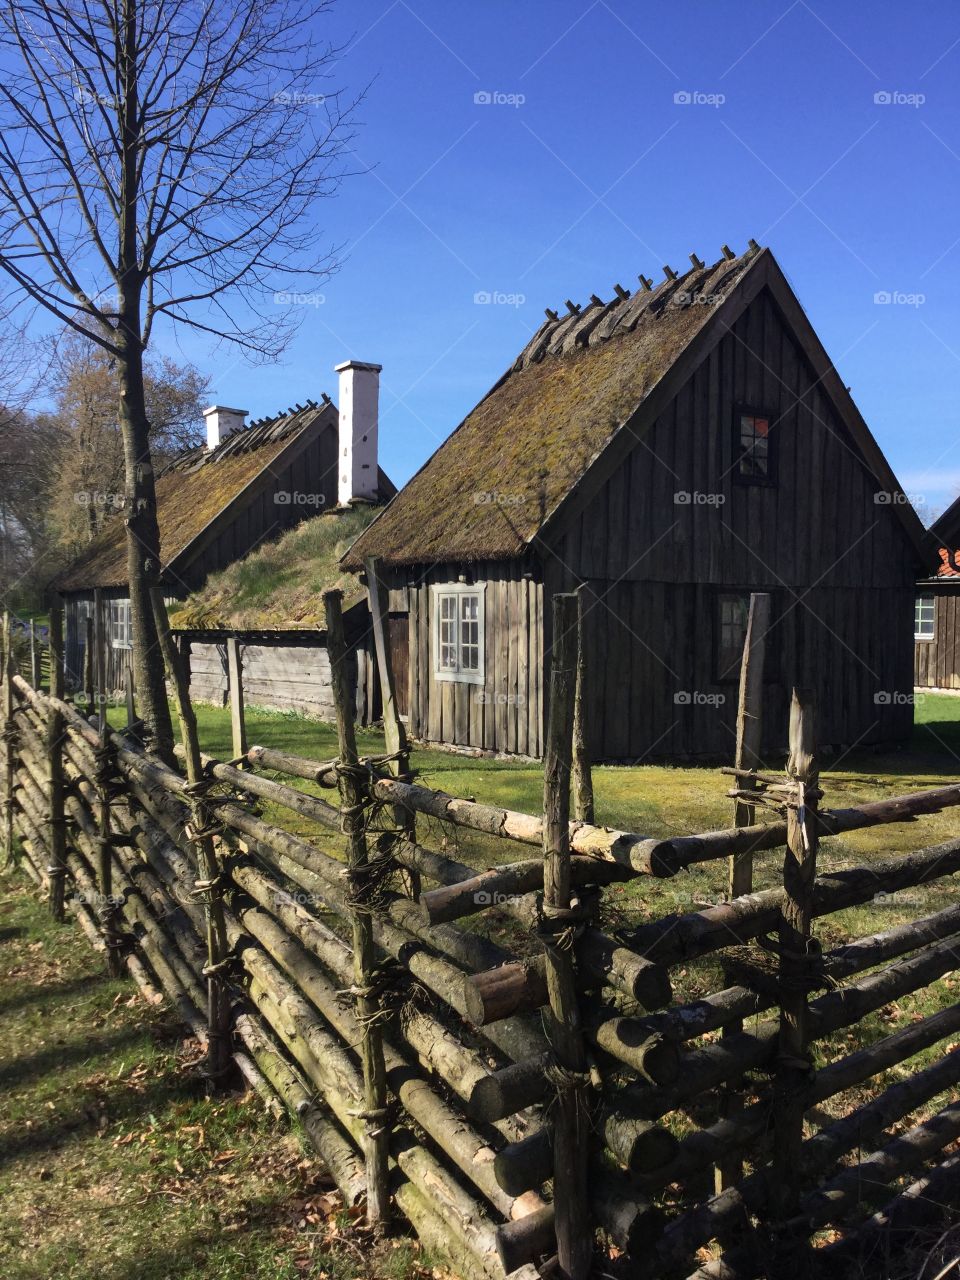 These little beautiful houses in Laholm and are reminiscent of bygone times.